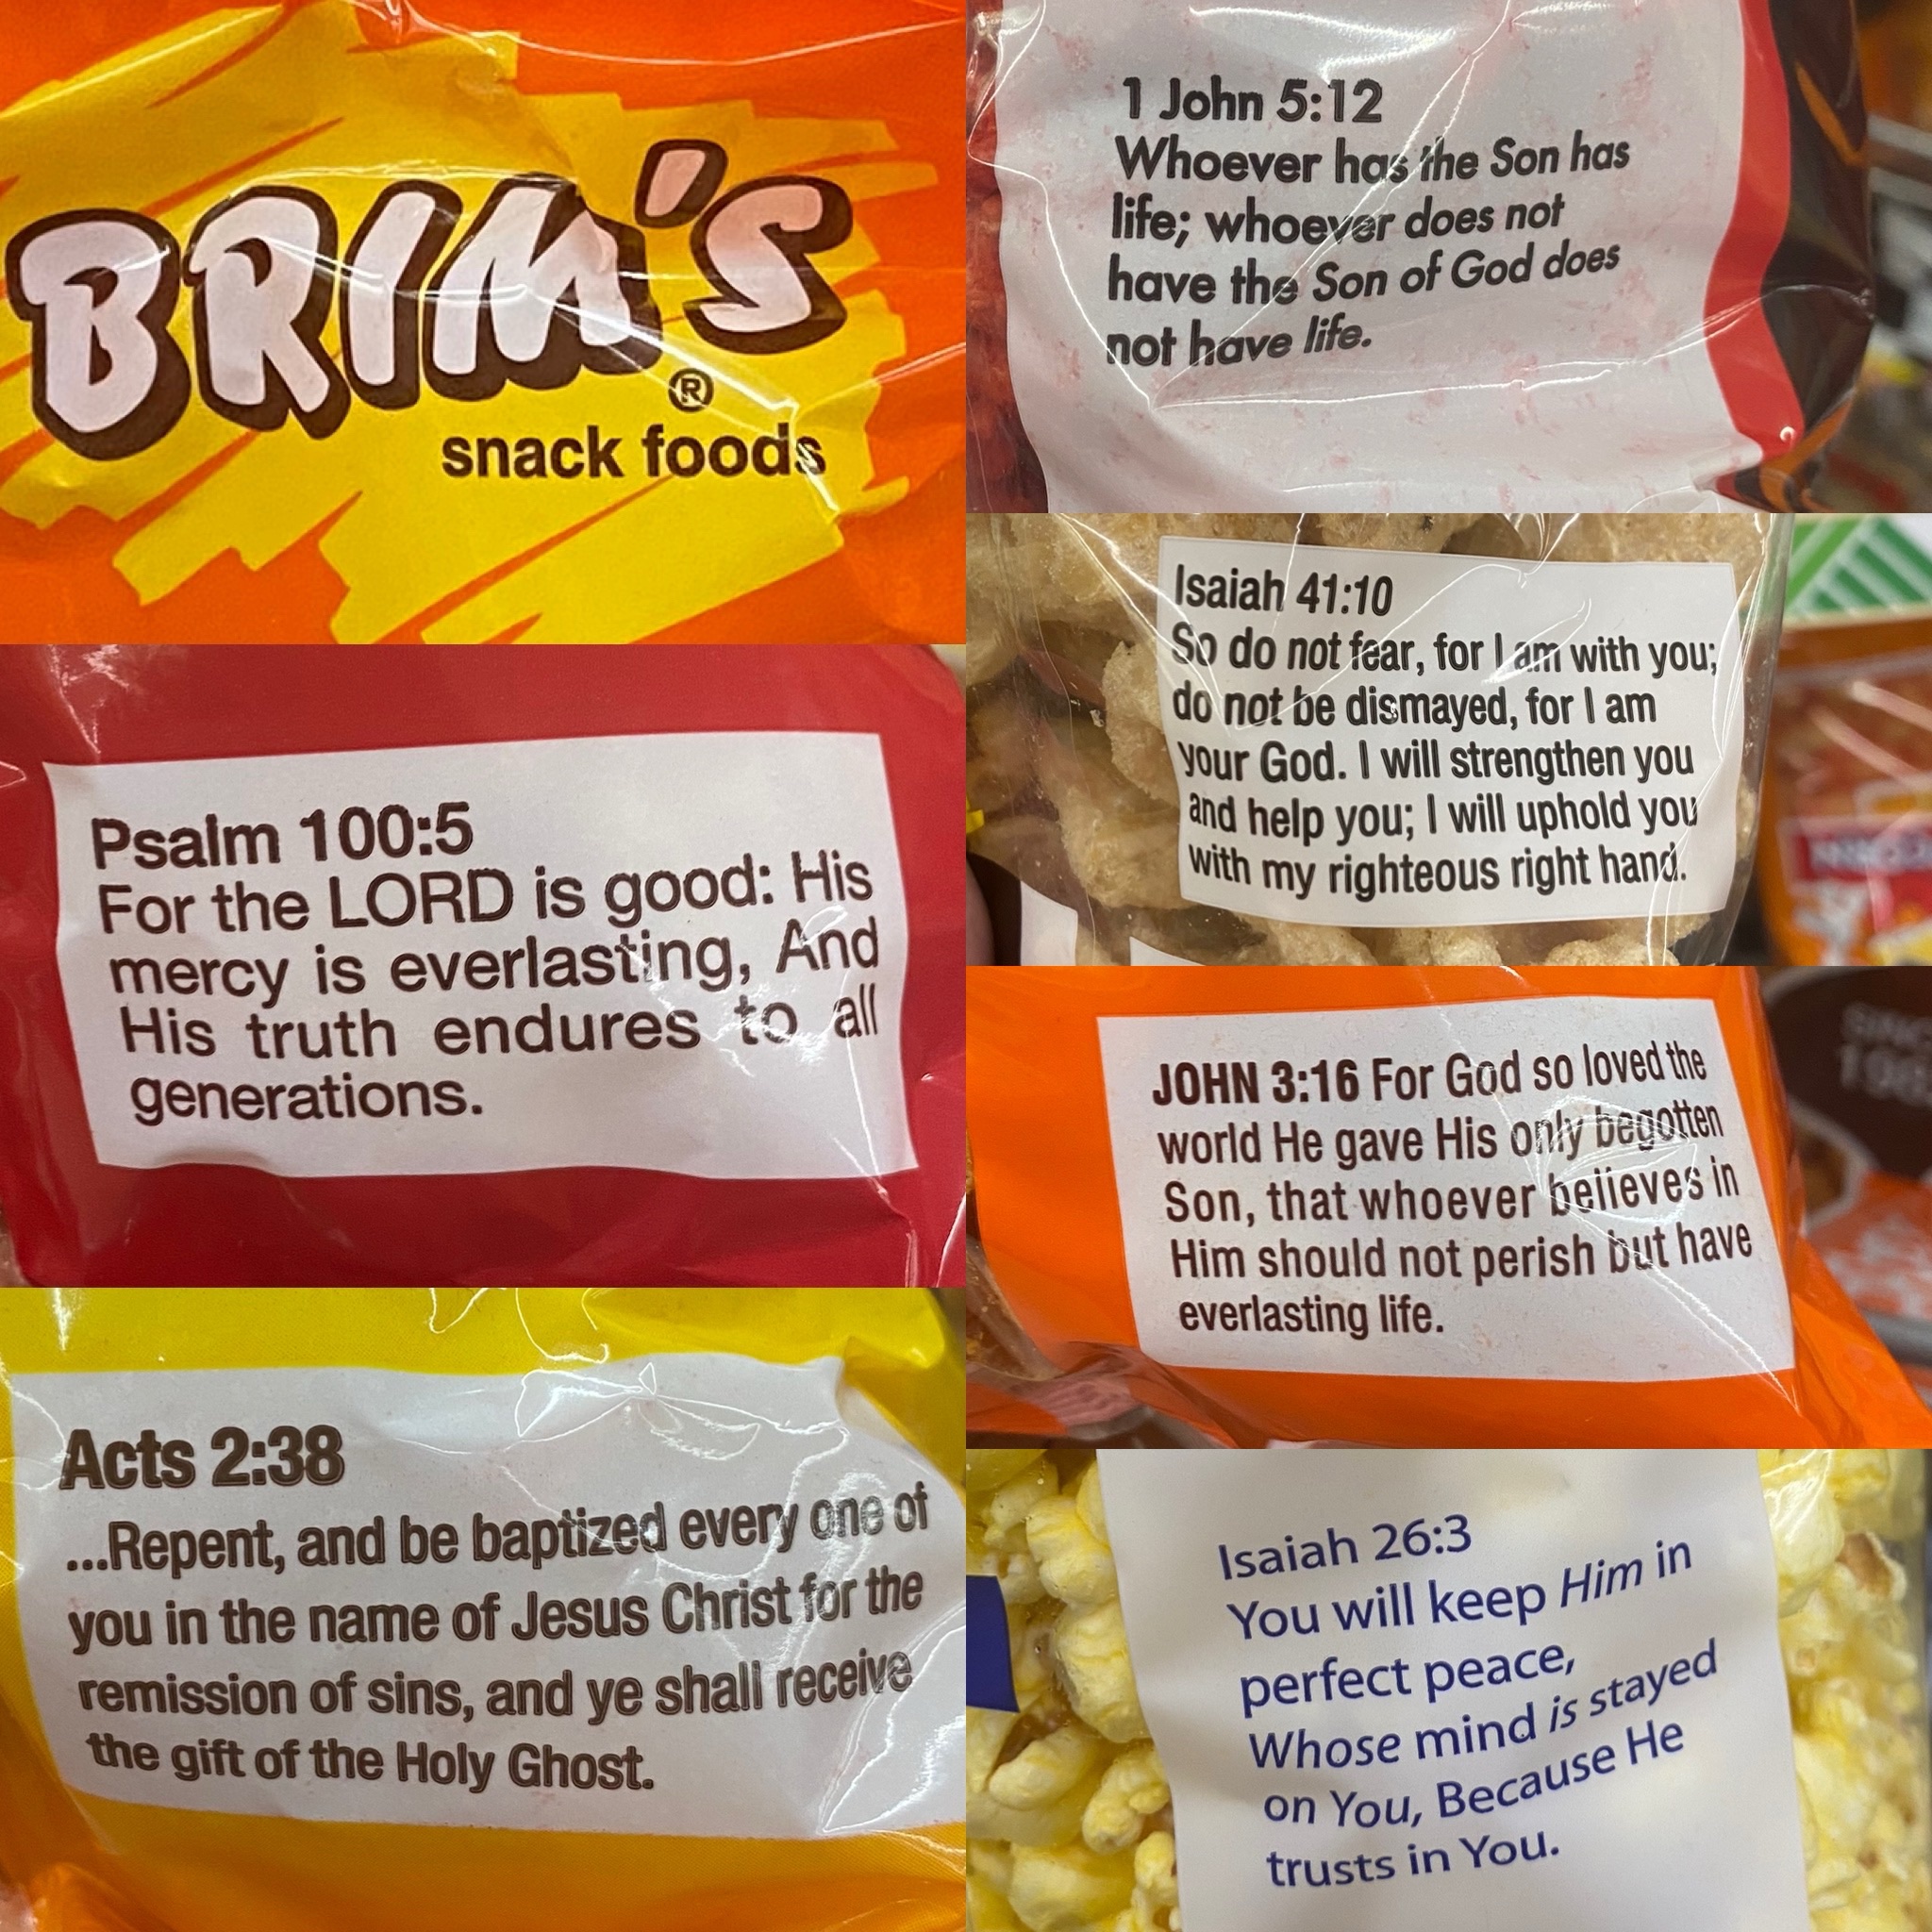 Brim’s Chips have Bible verses on their packaging - while at the Dollar Tree my wife told me about how these snack bags have Bible verses on them. 